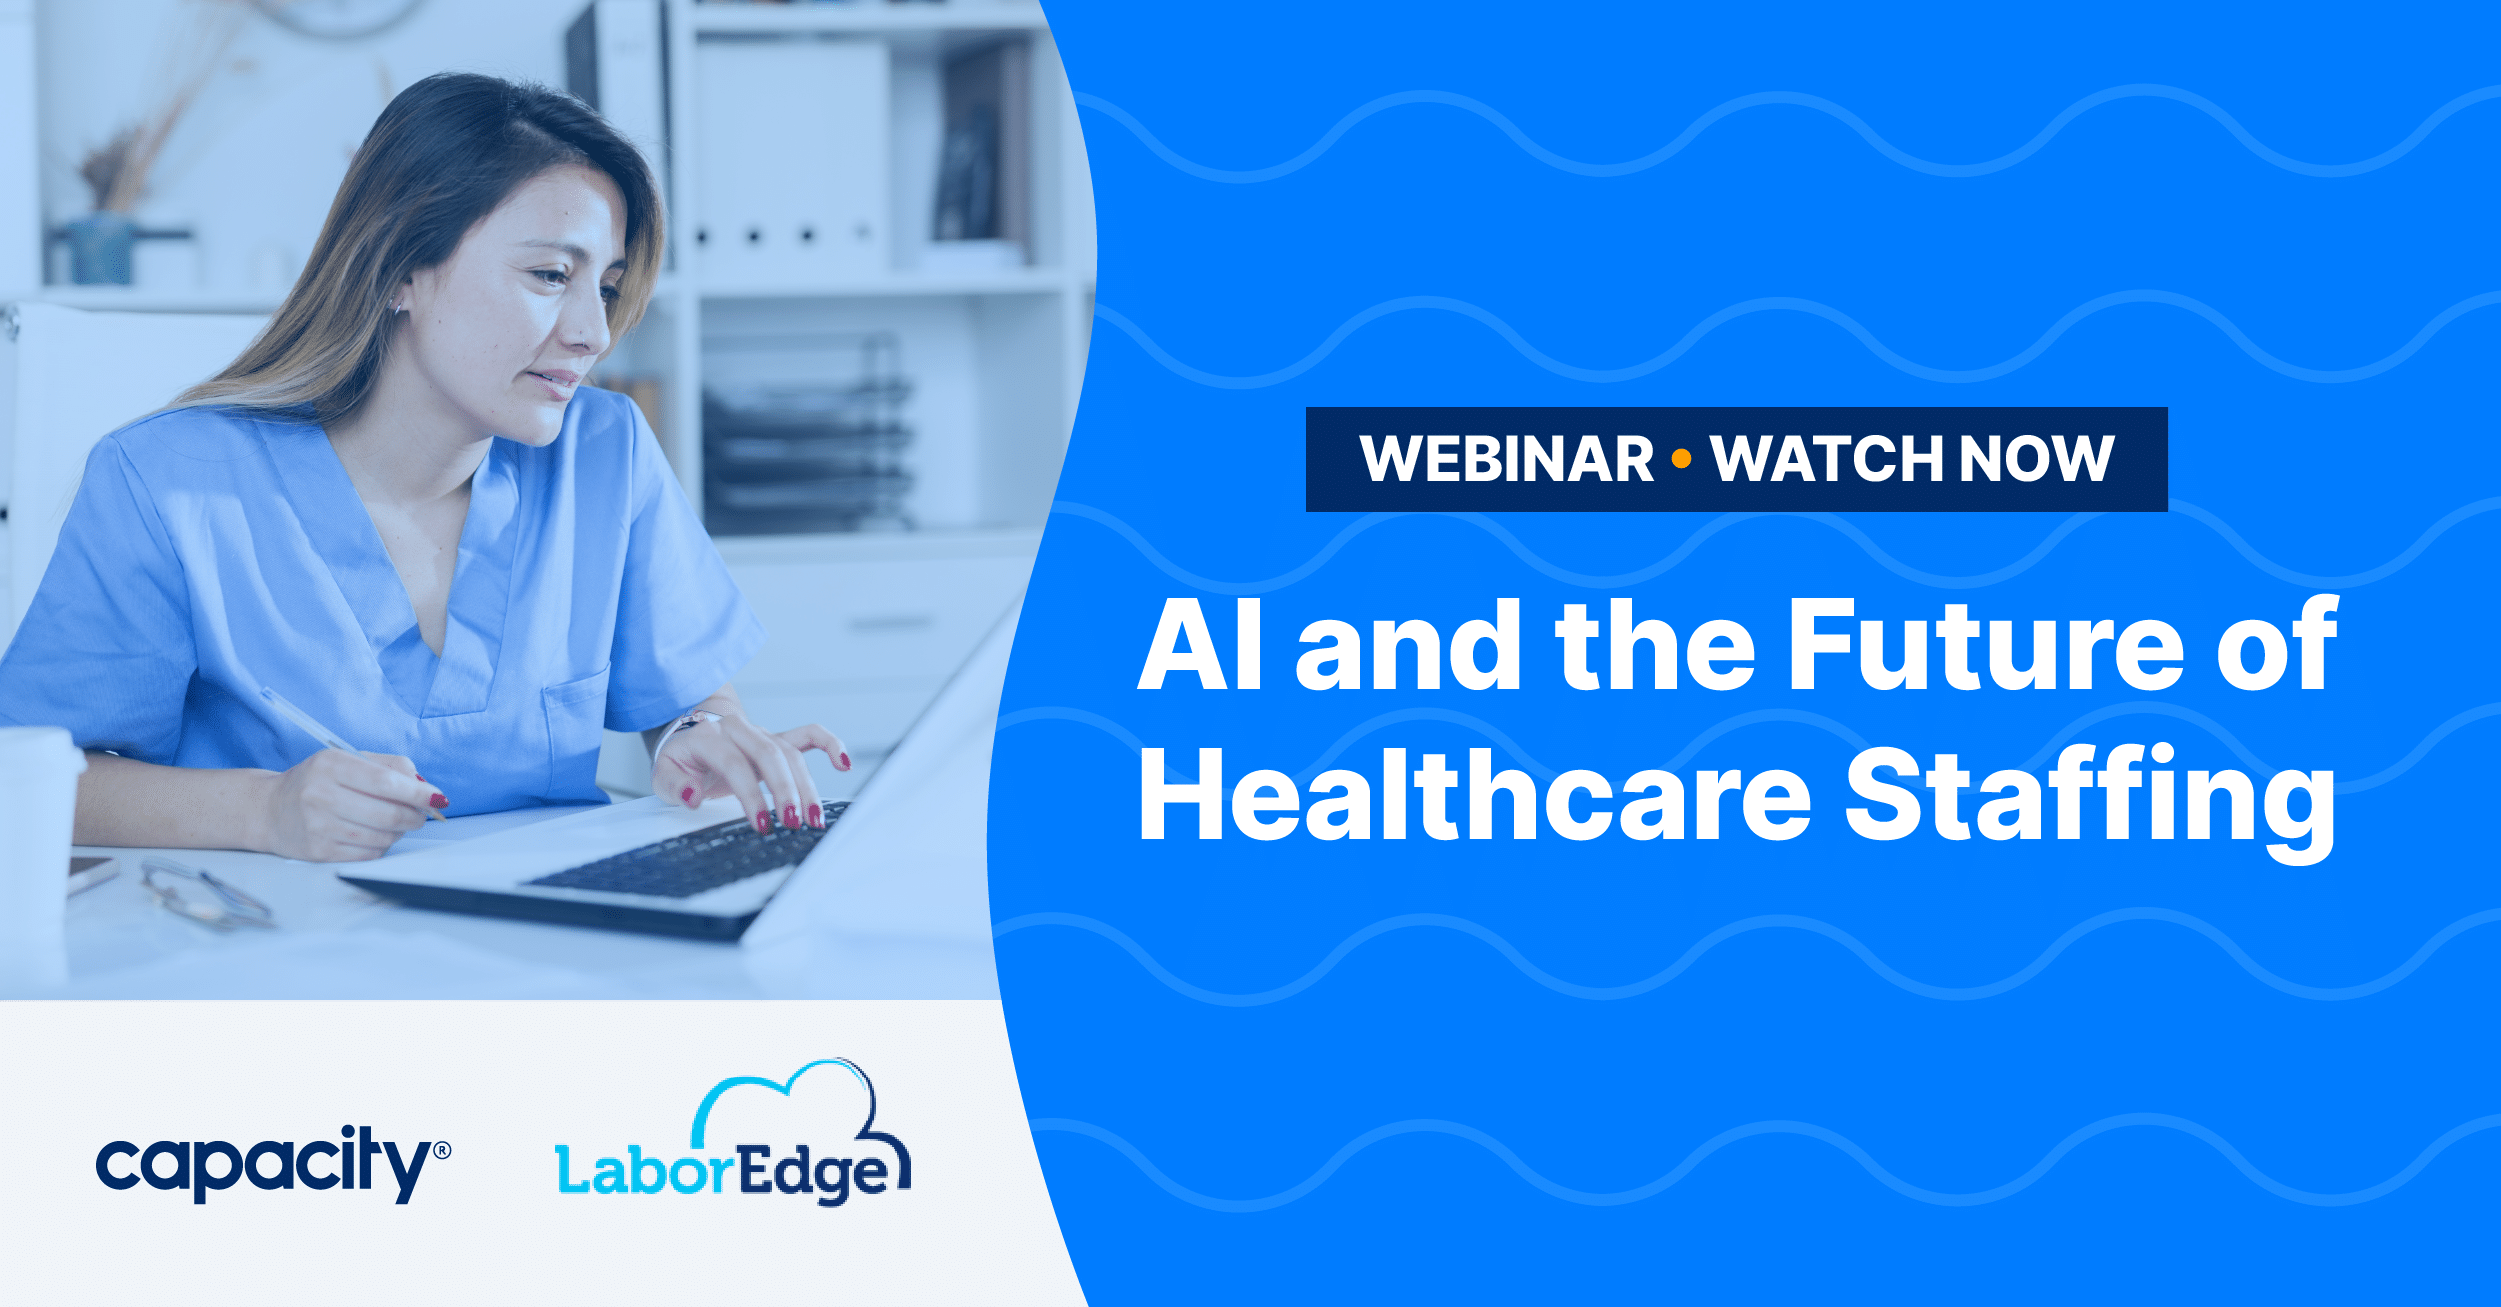 AI and the Future of Healthcare Staffing with Capacity and LaborEdge